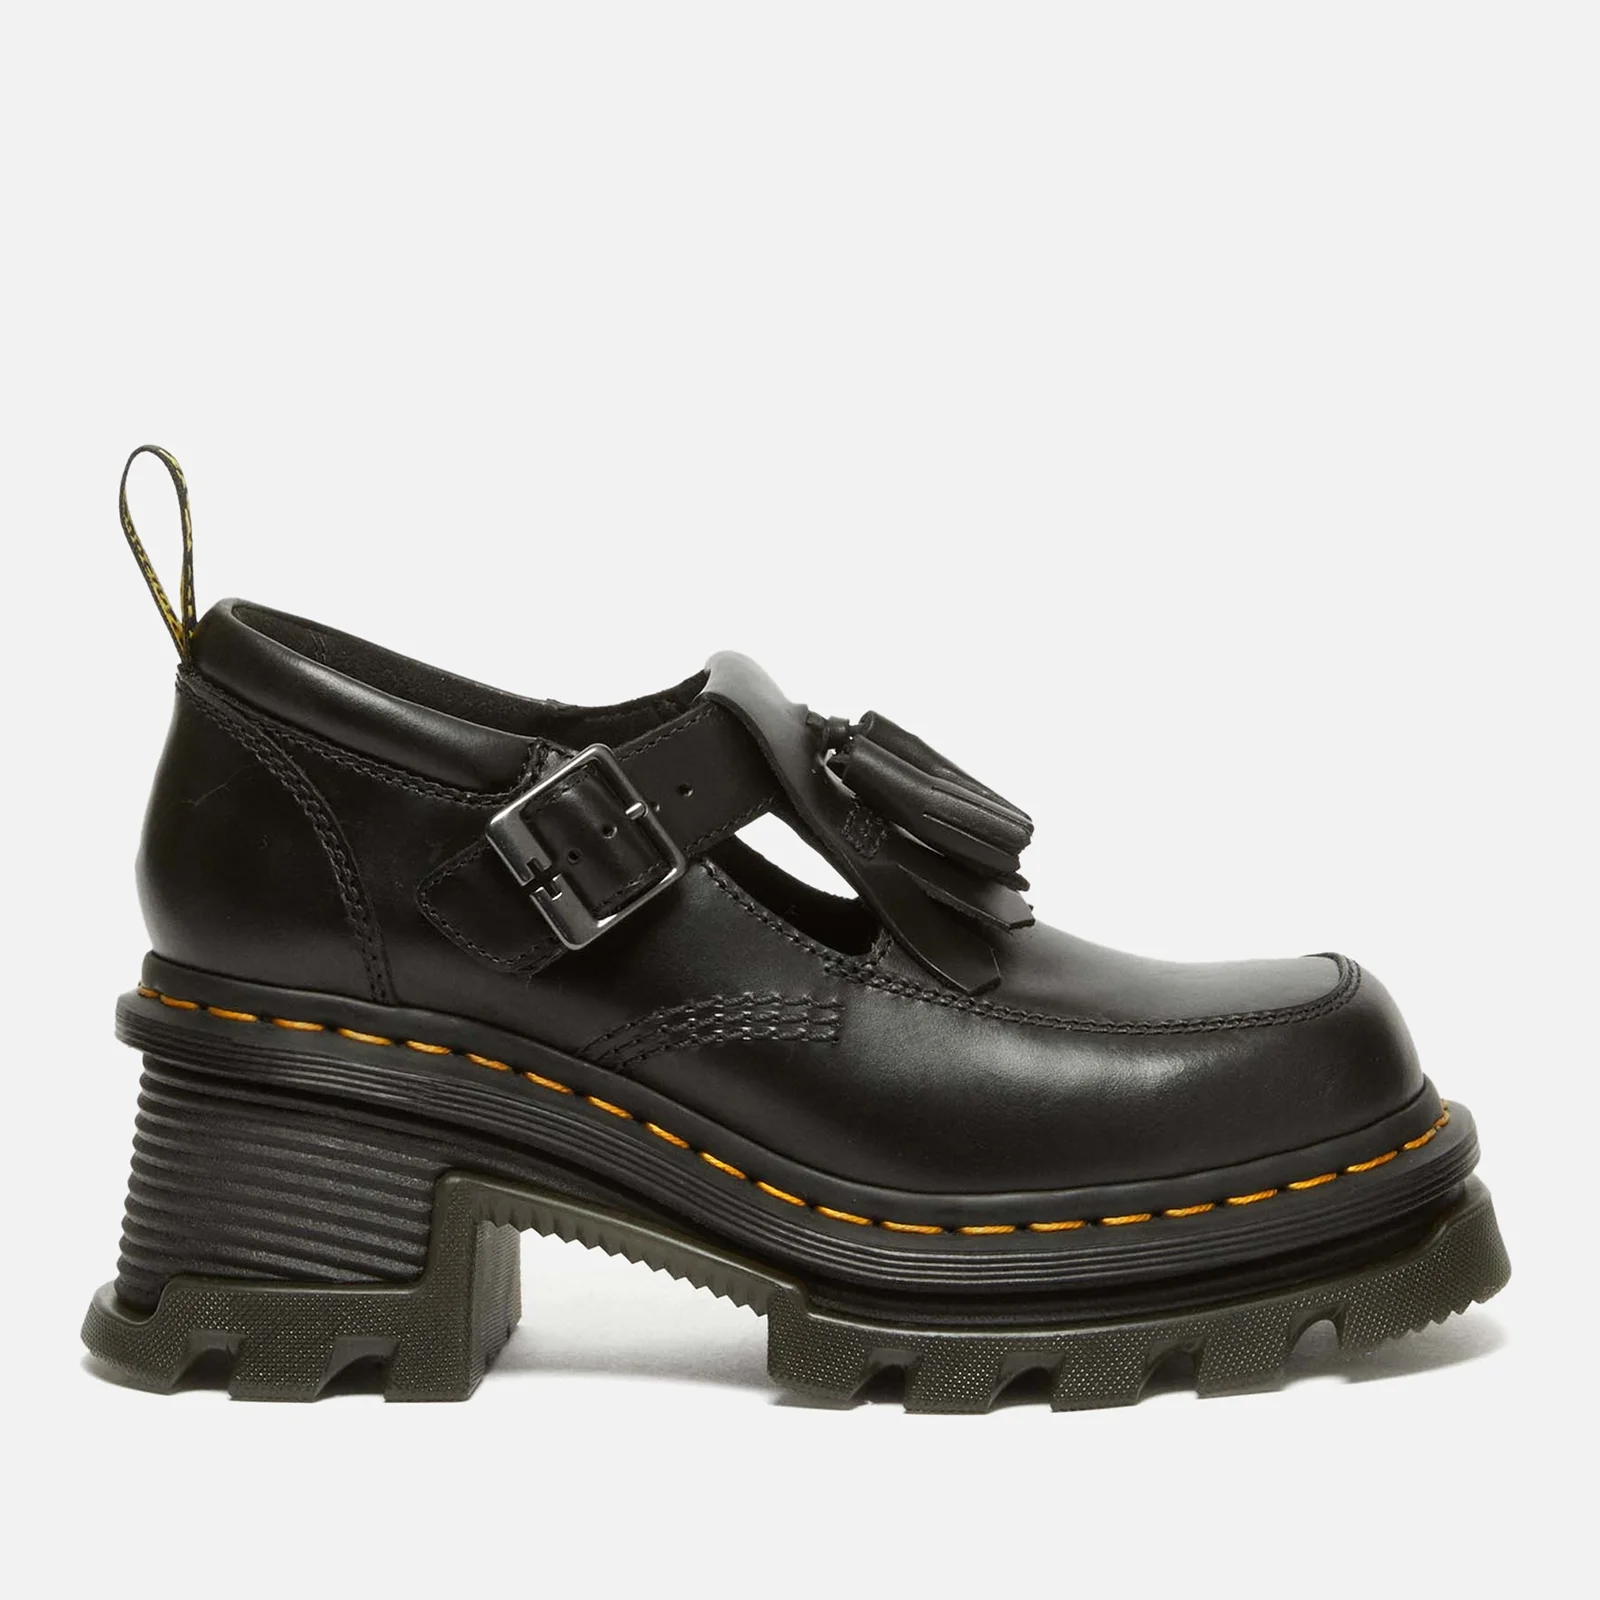 Dr. Martens Women's Corran Leather Heeled Mary-Jane Shoes Image 1